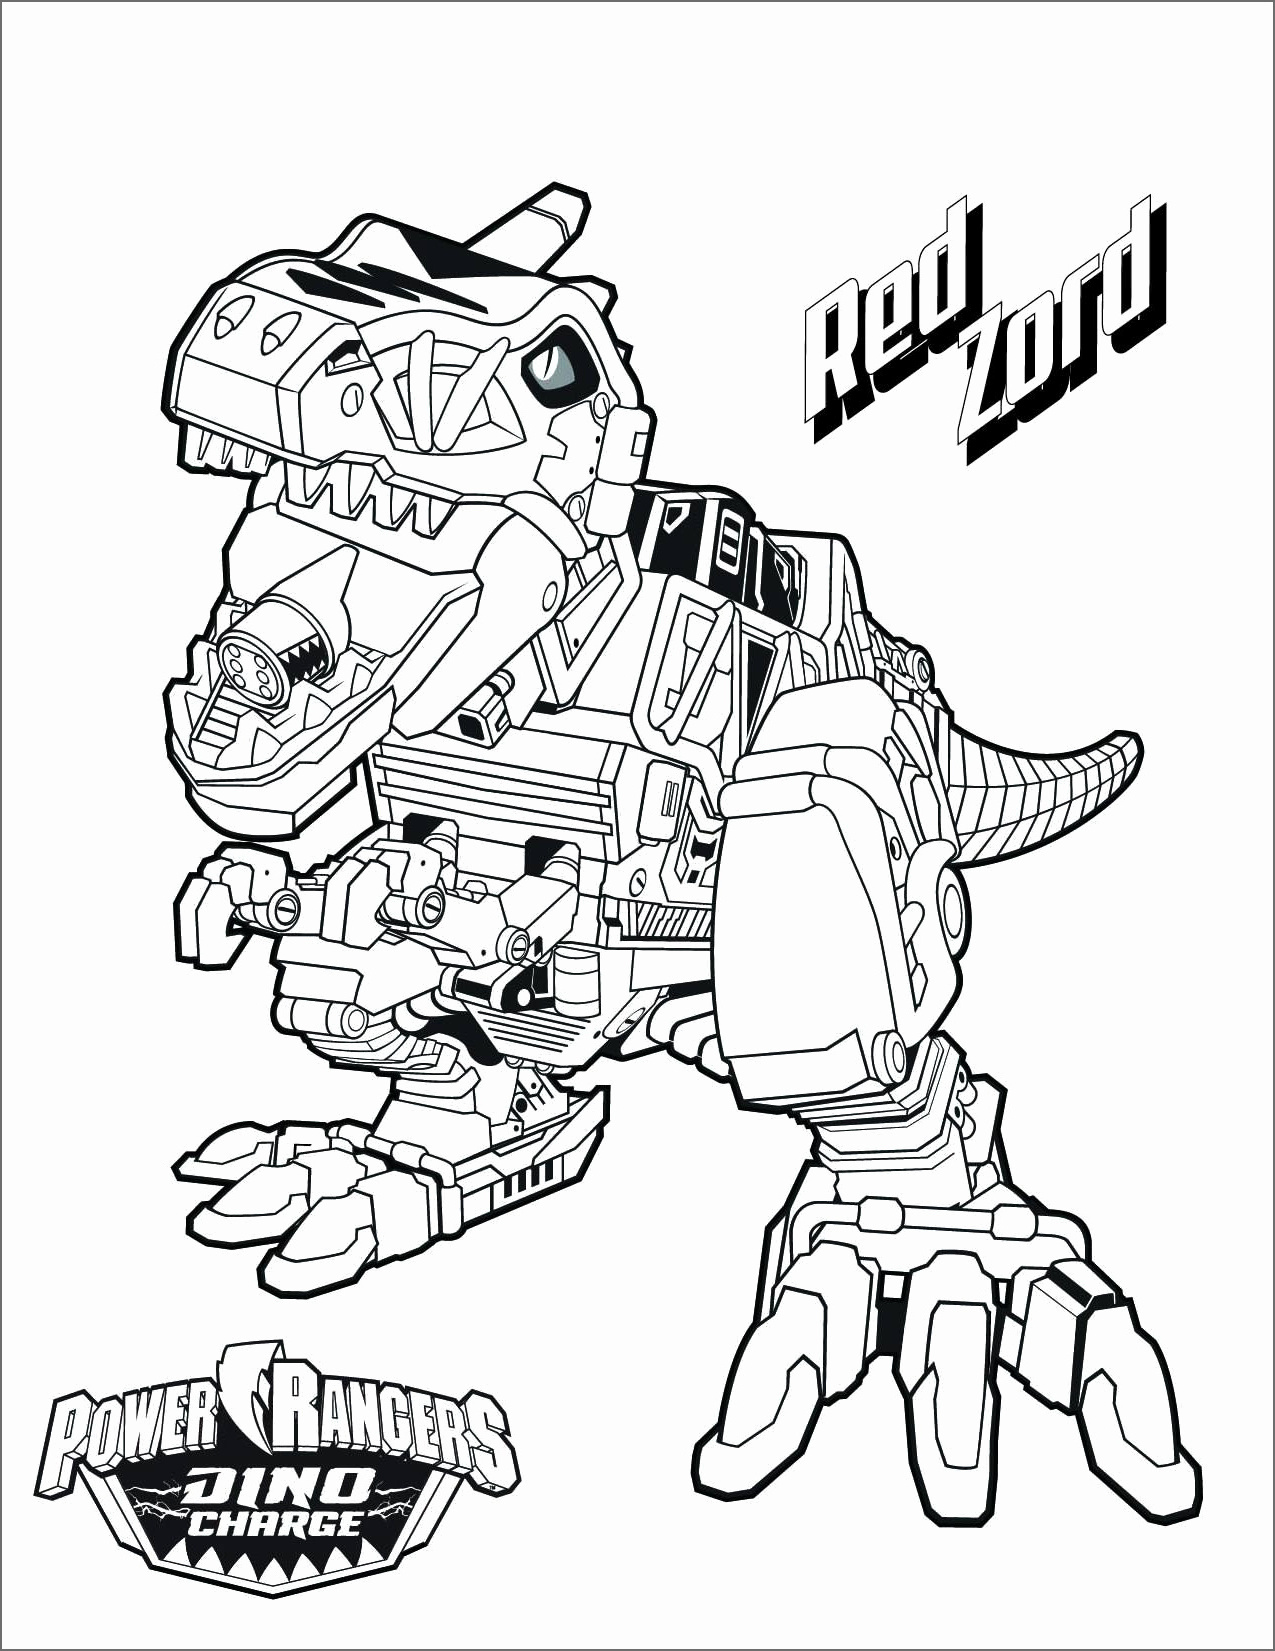 coloriage power rangers dino super charge beau image de coloriage 90 25 coloriage power rangers dino charge